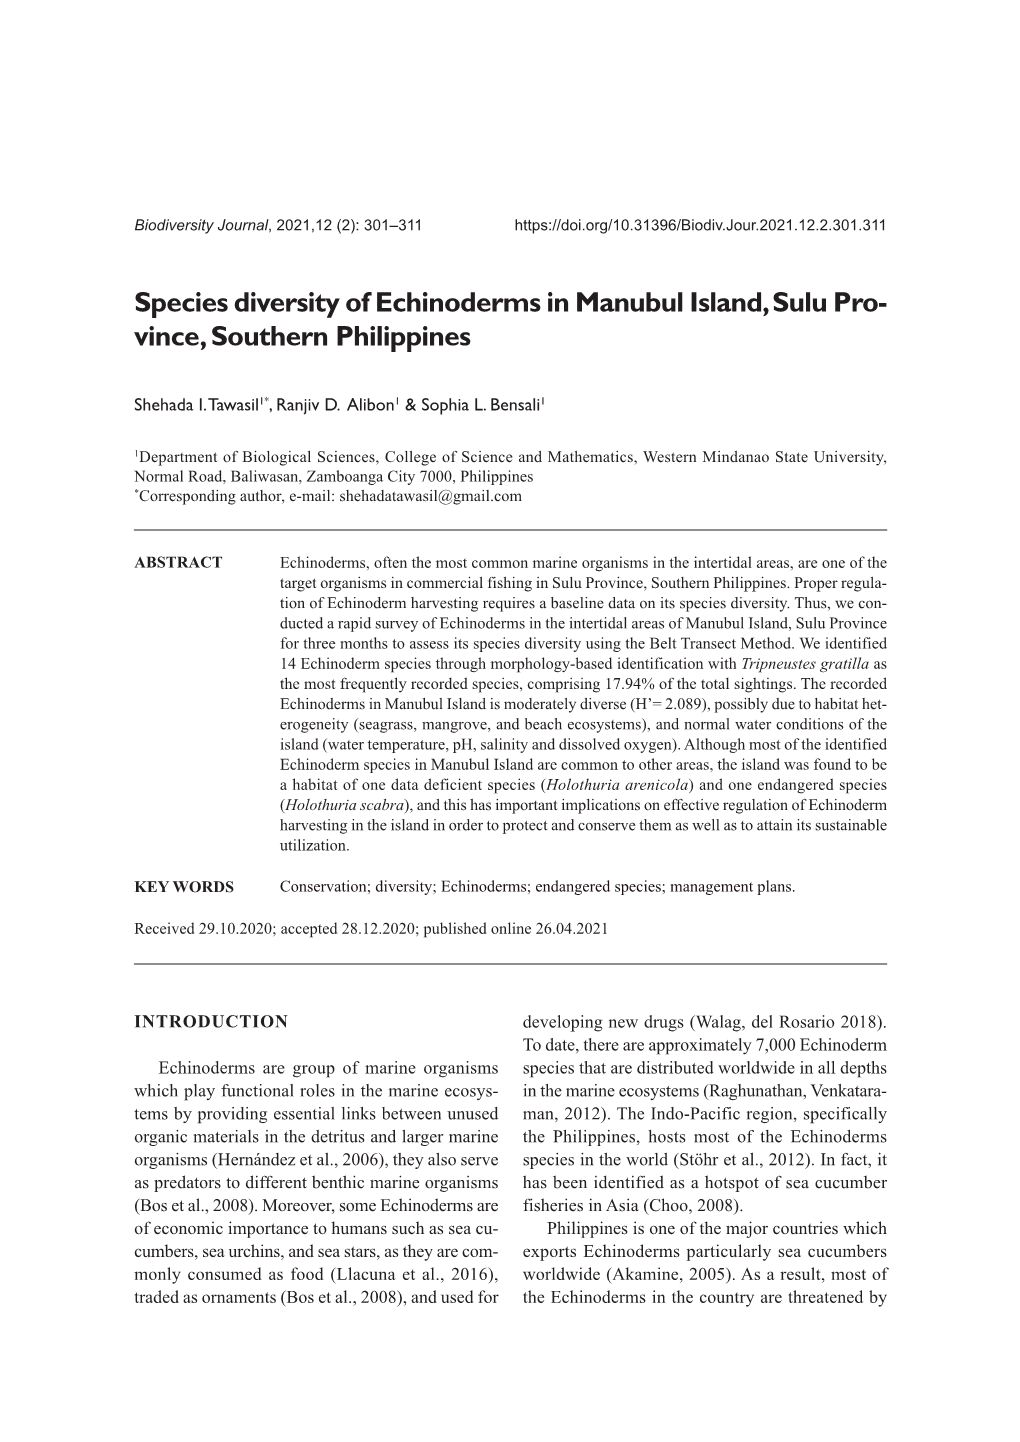 Species Diversity of Echinoderms in Manubul Island, Sulu Pro- Vince, Southern Philippines